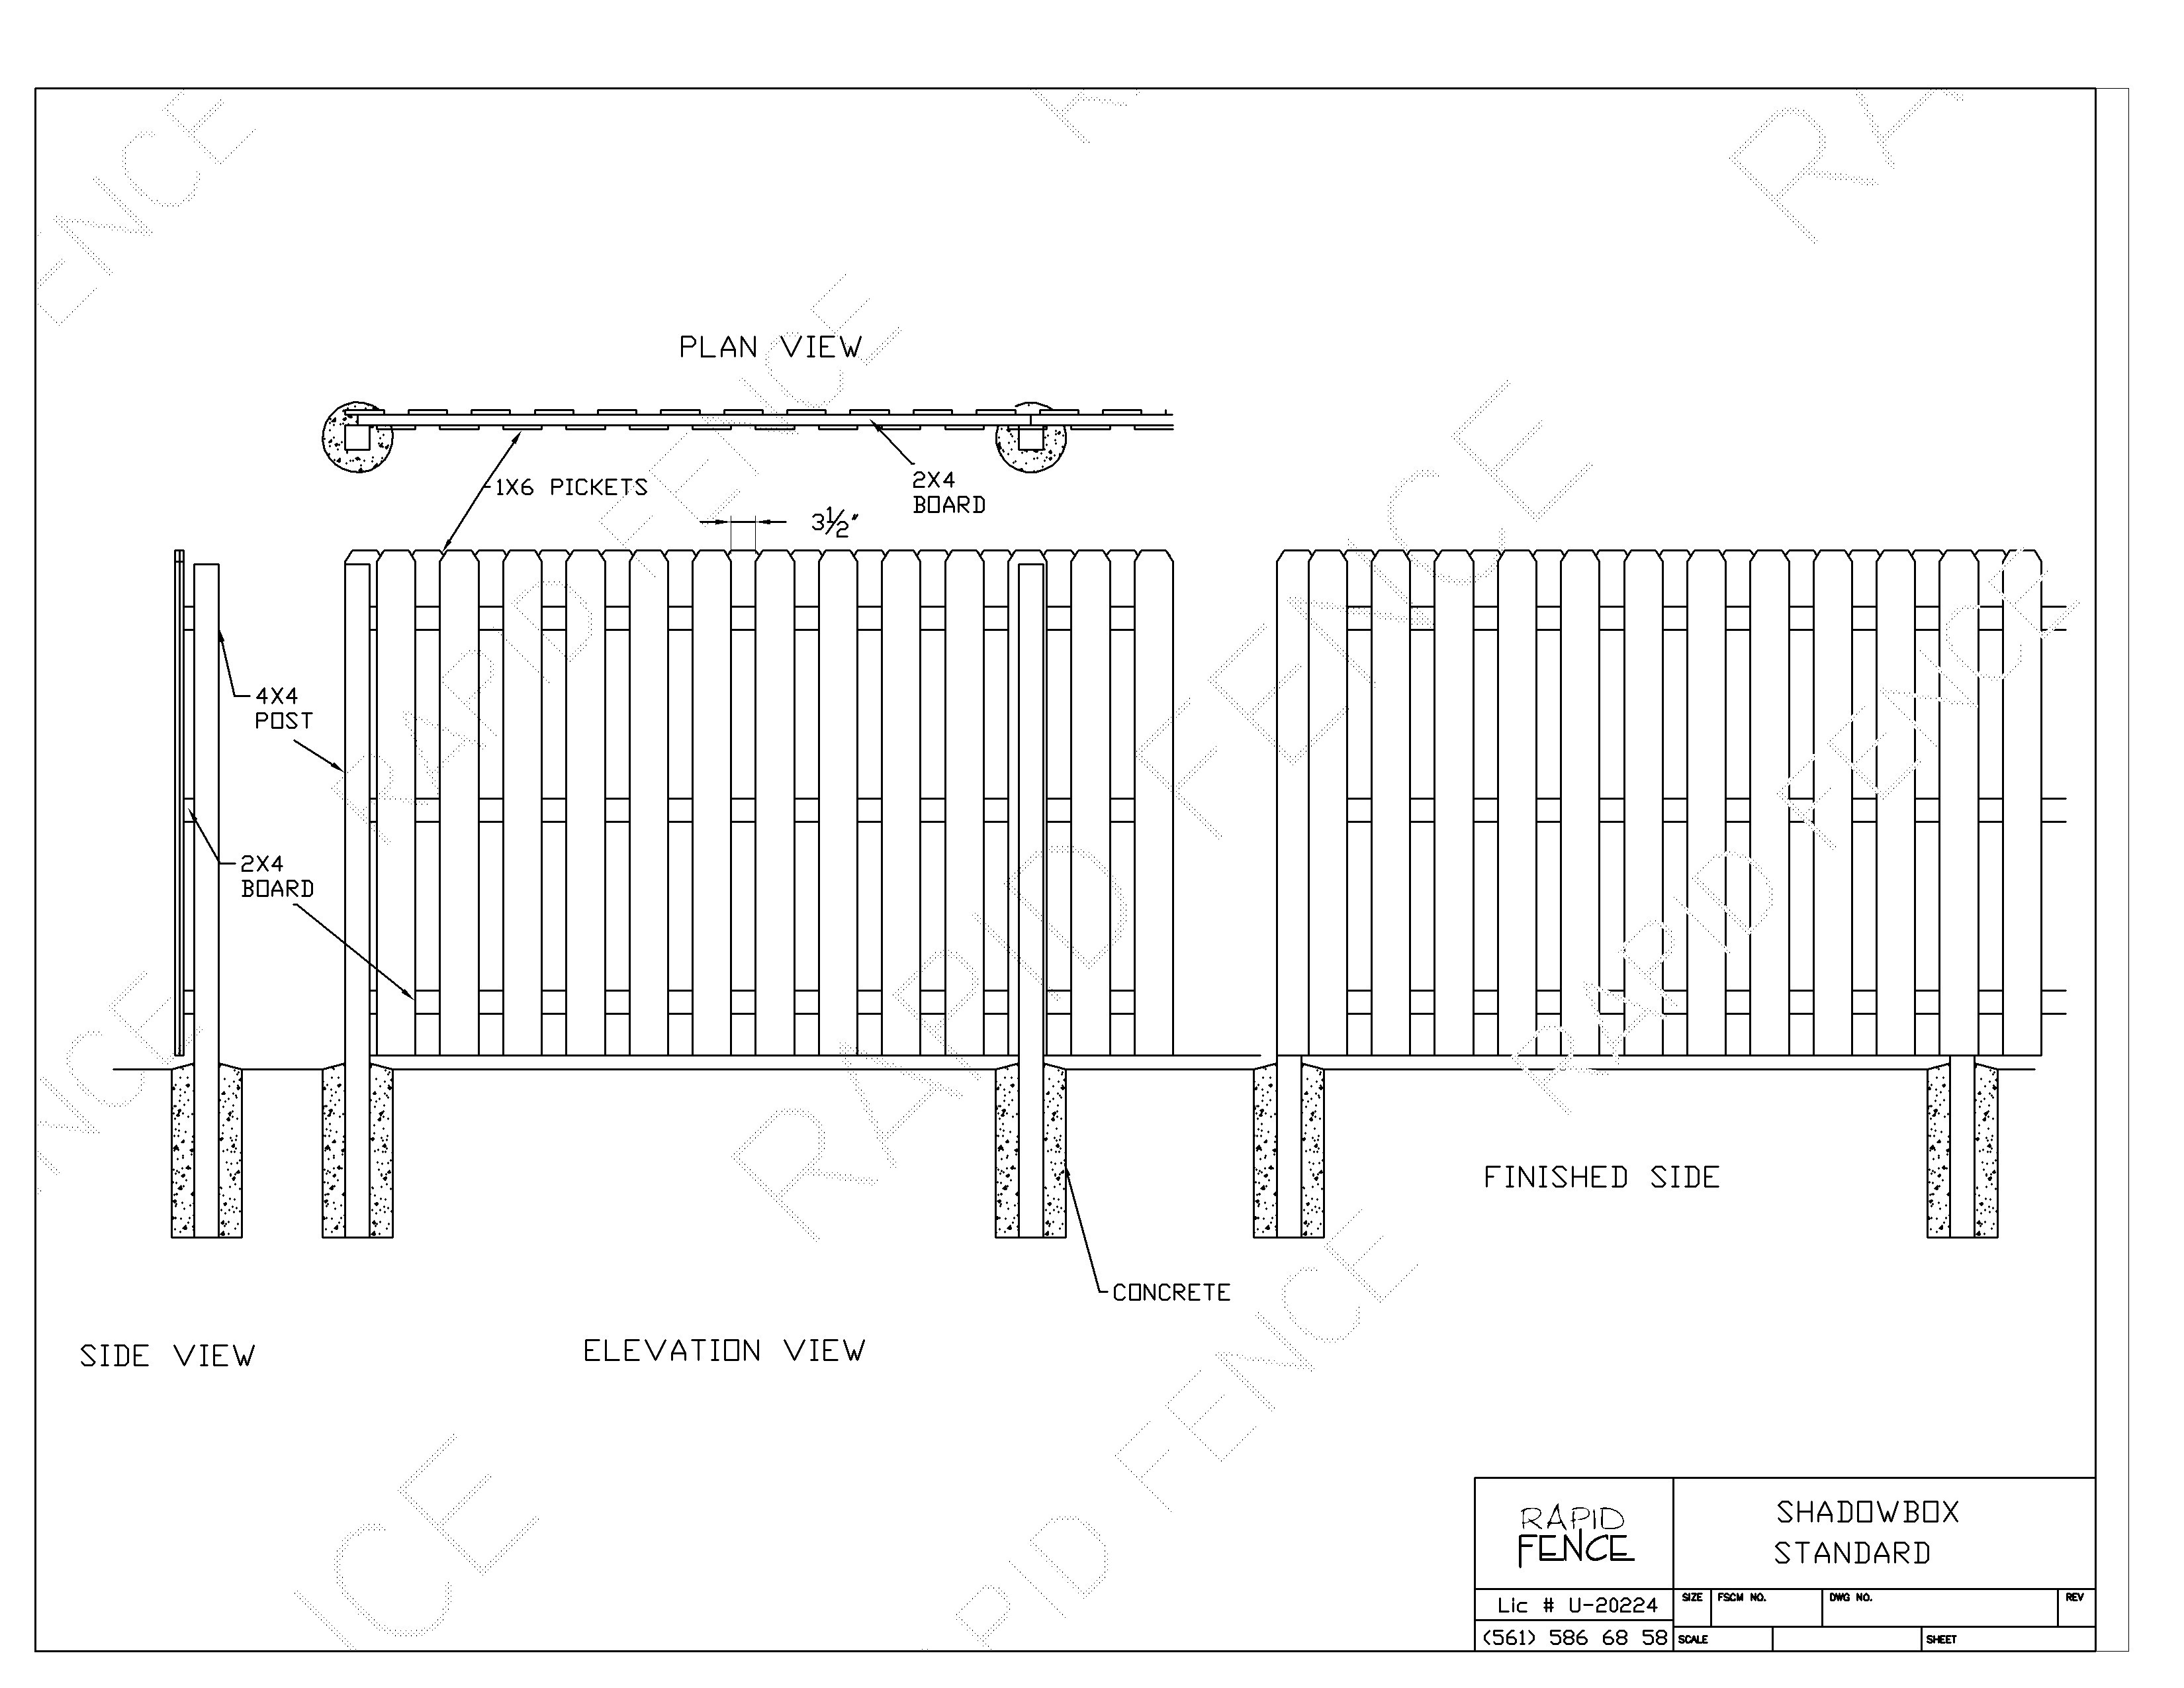 How To Build A Shadow Box Fence